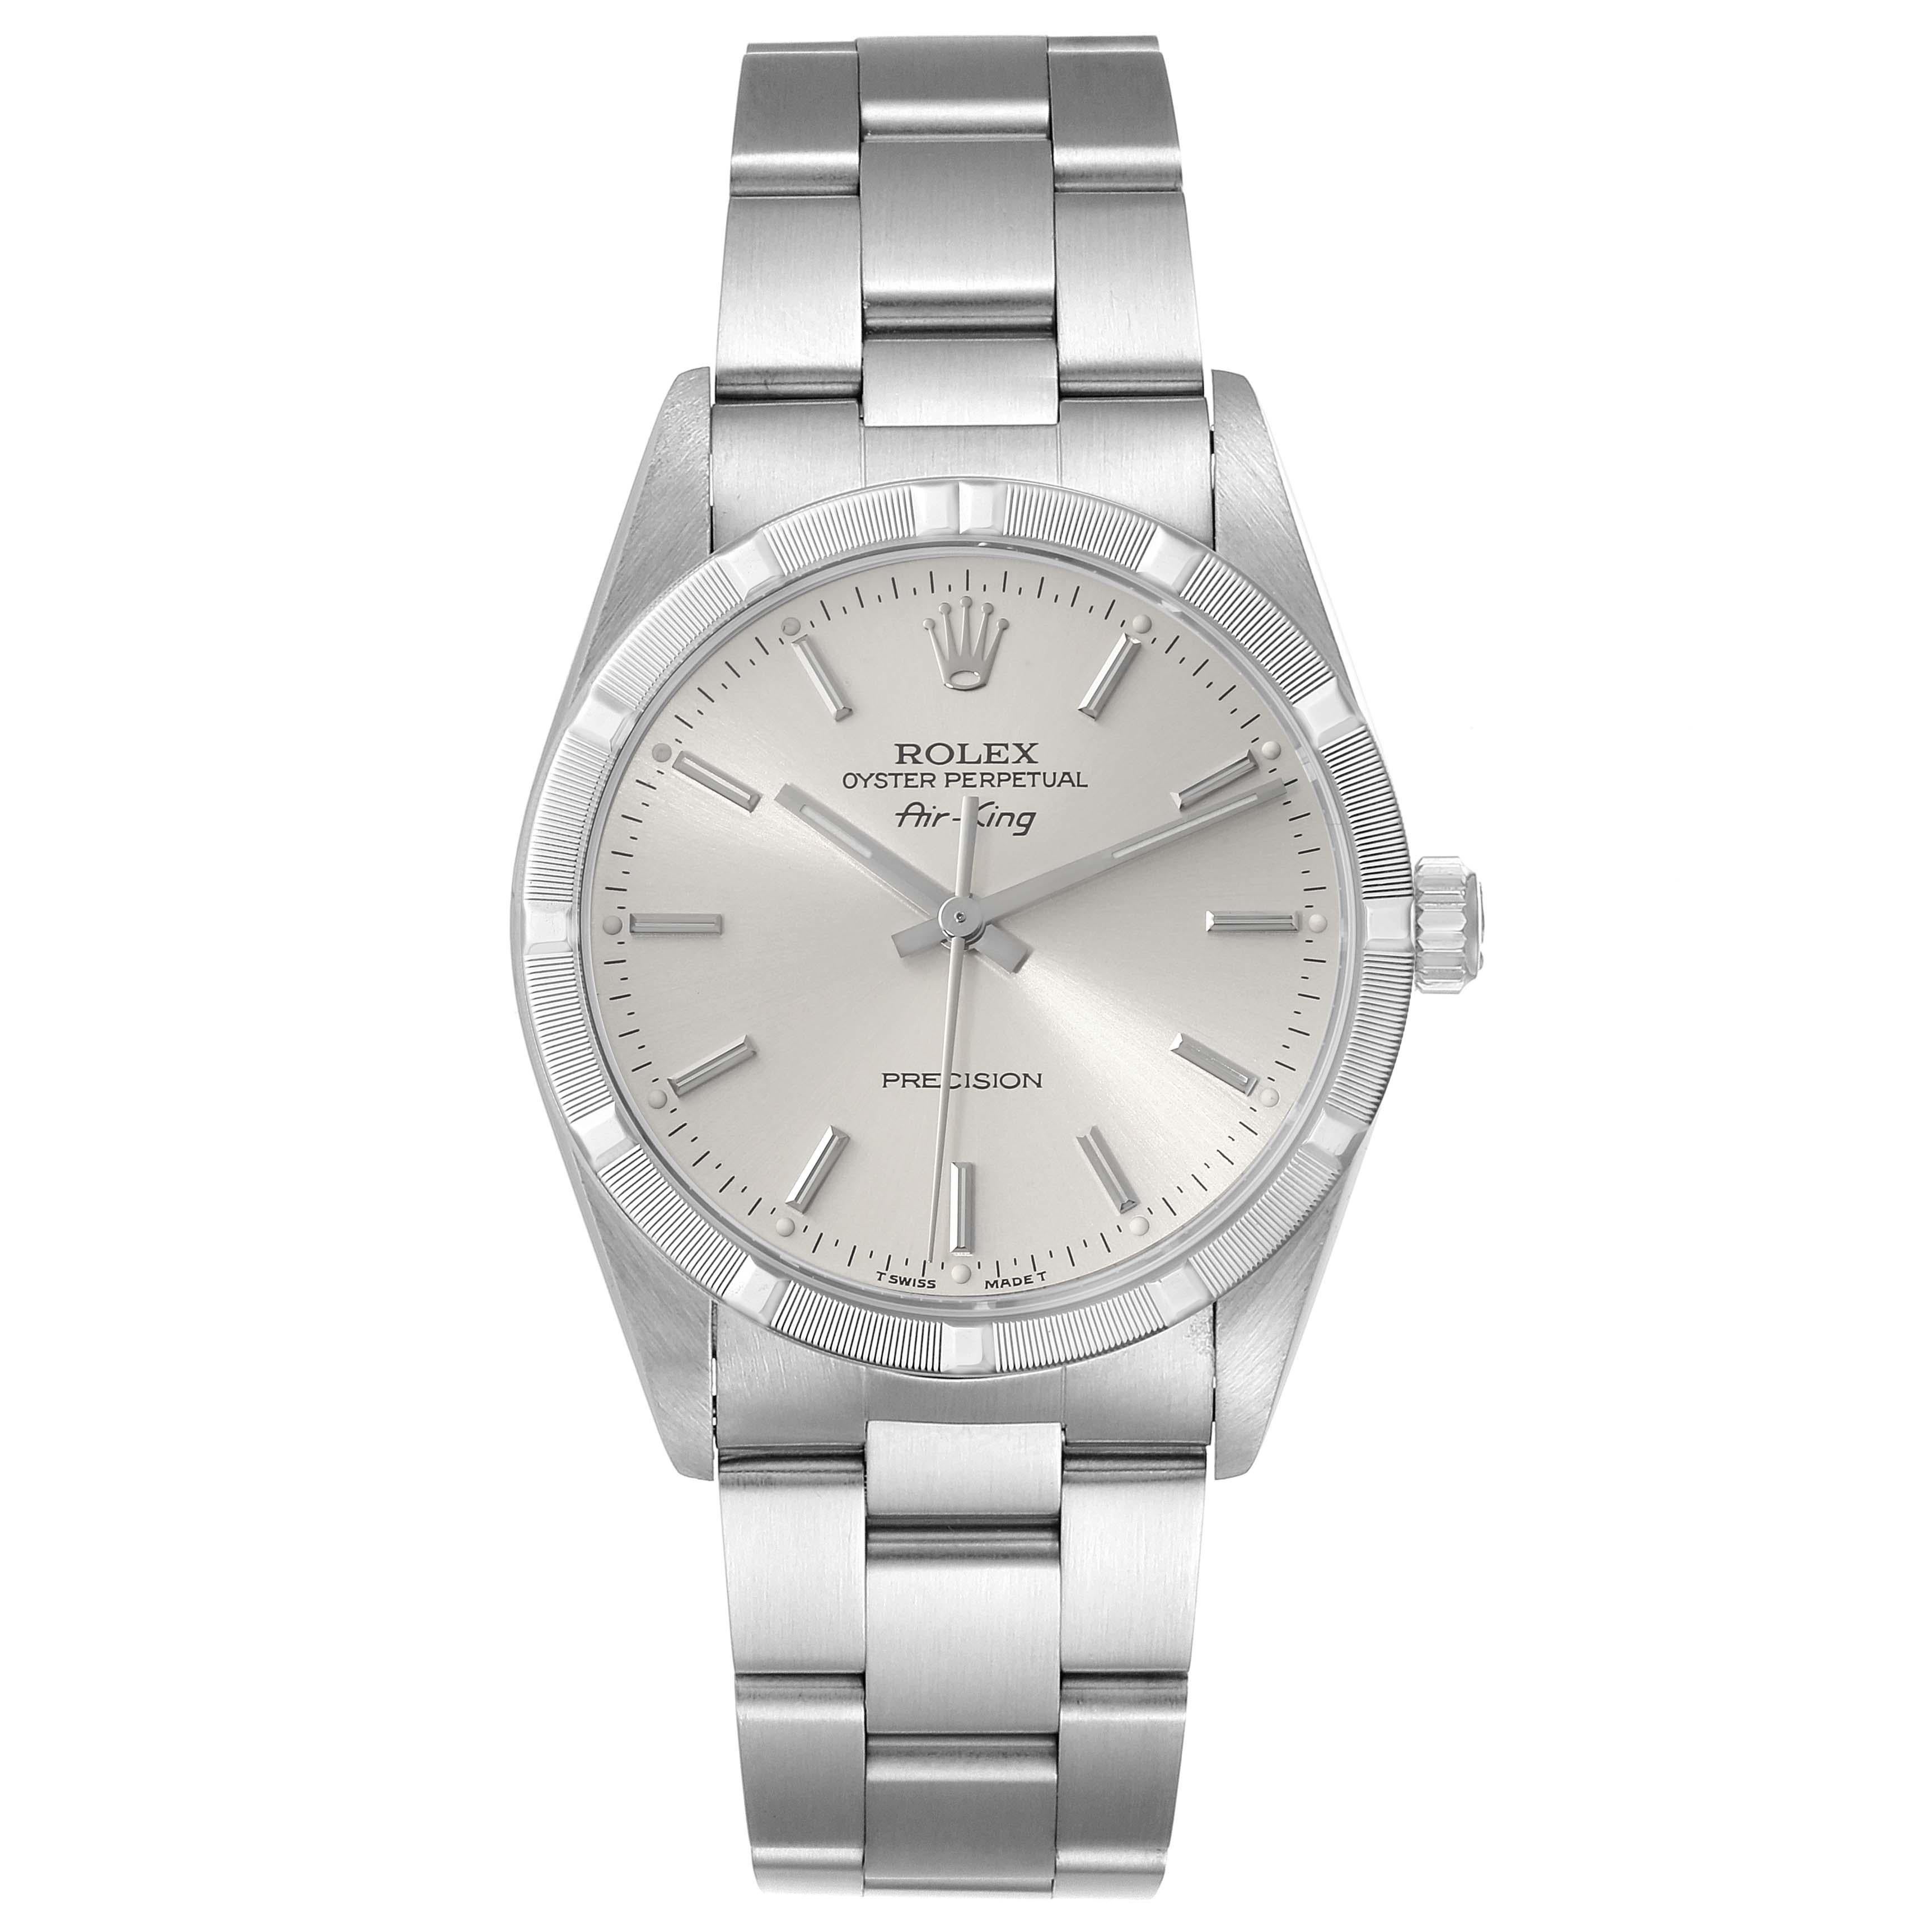 Rolex Air King Silver Dial 34mm Engine Turned Bezel Steel Mens Watch 14010. Automatic self-winding movement. Stainless steel case 34.0 mm in diameter. Rolex logo on crown. Stainless steel engine turned bezel. Scratch resistant sapphire crystal.